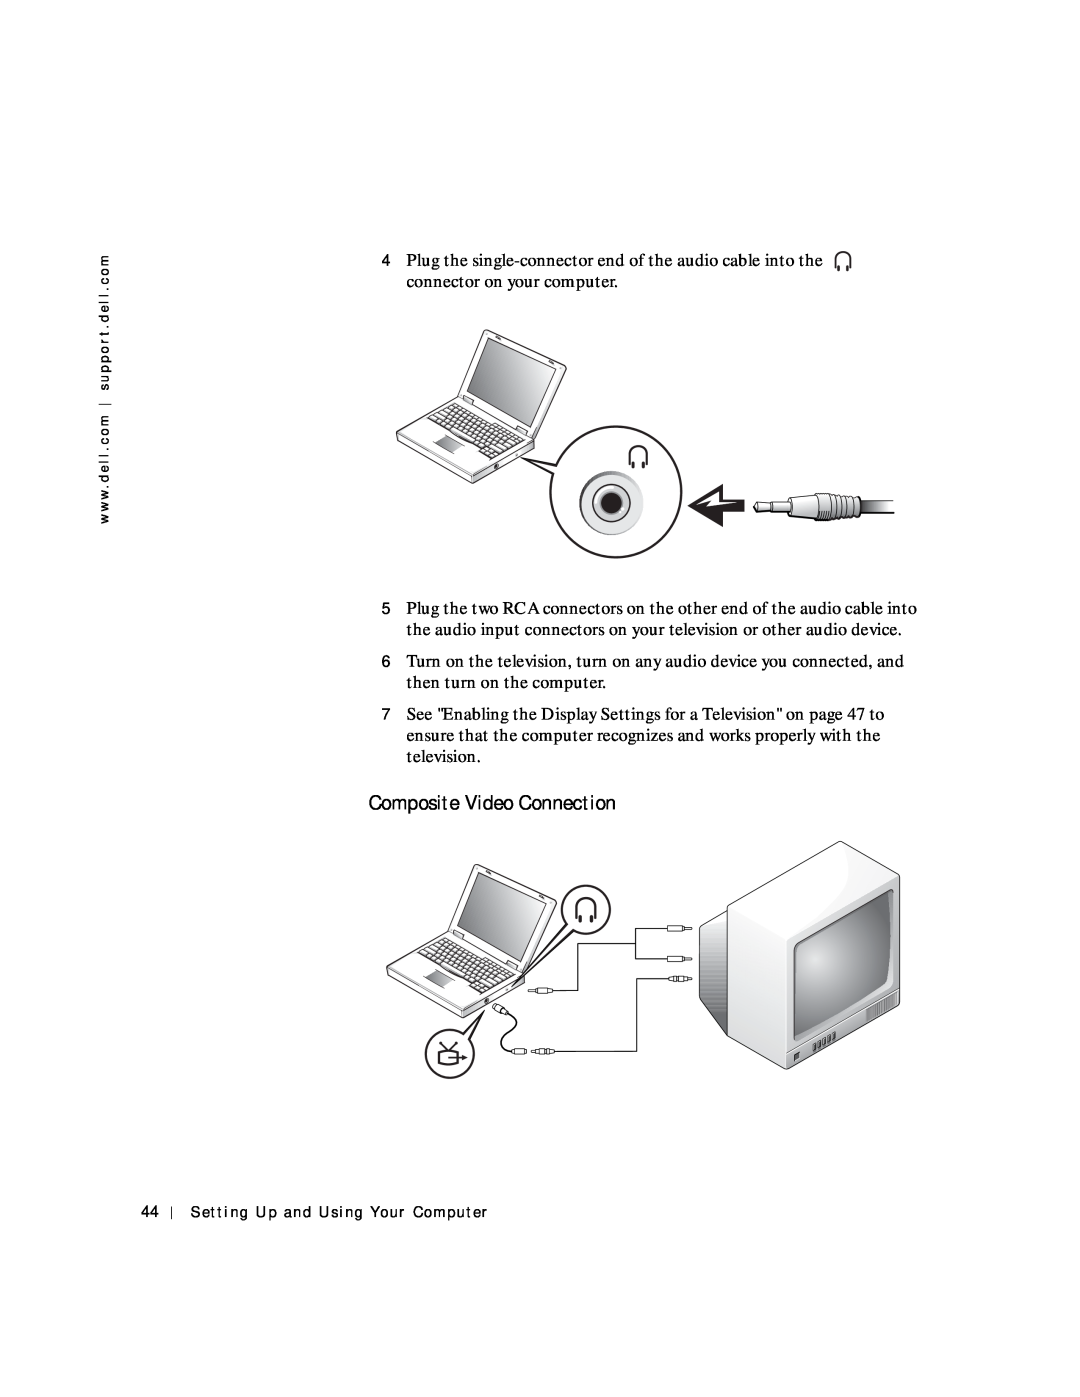 Dell 4150 owner manual Composite Video Connection 